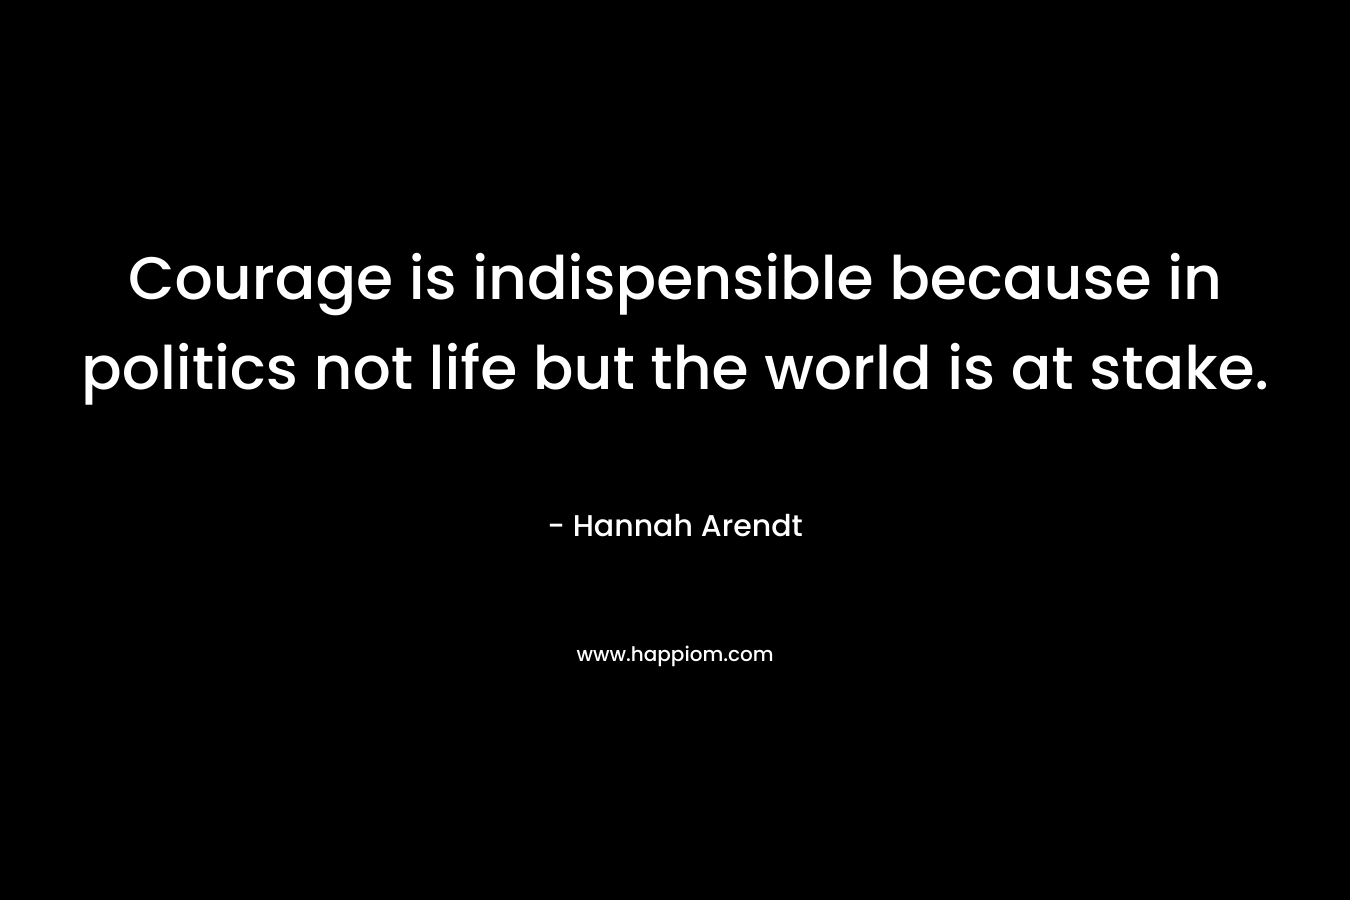 Courage is indispensible because in politics not life but the world is at stake. – Hannah Arendt